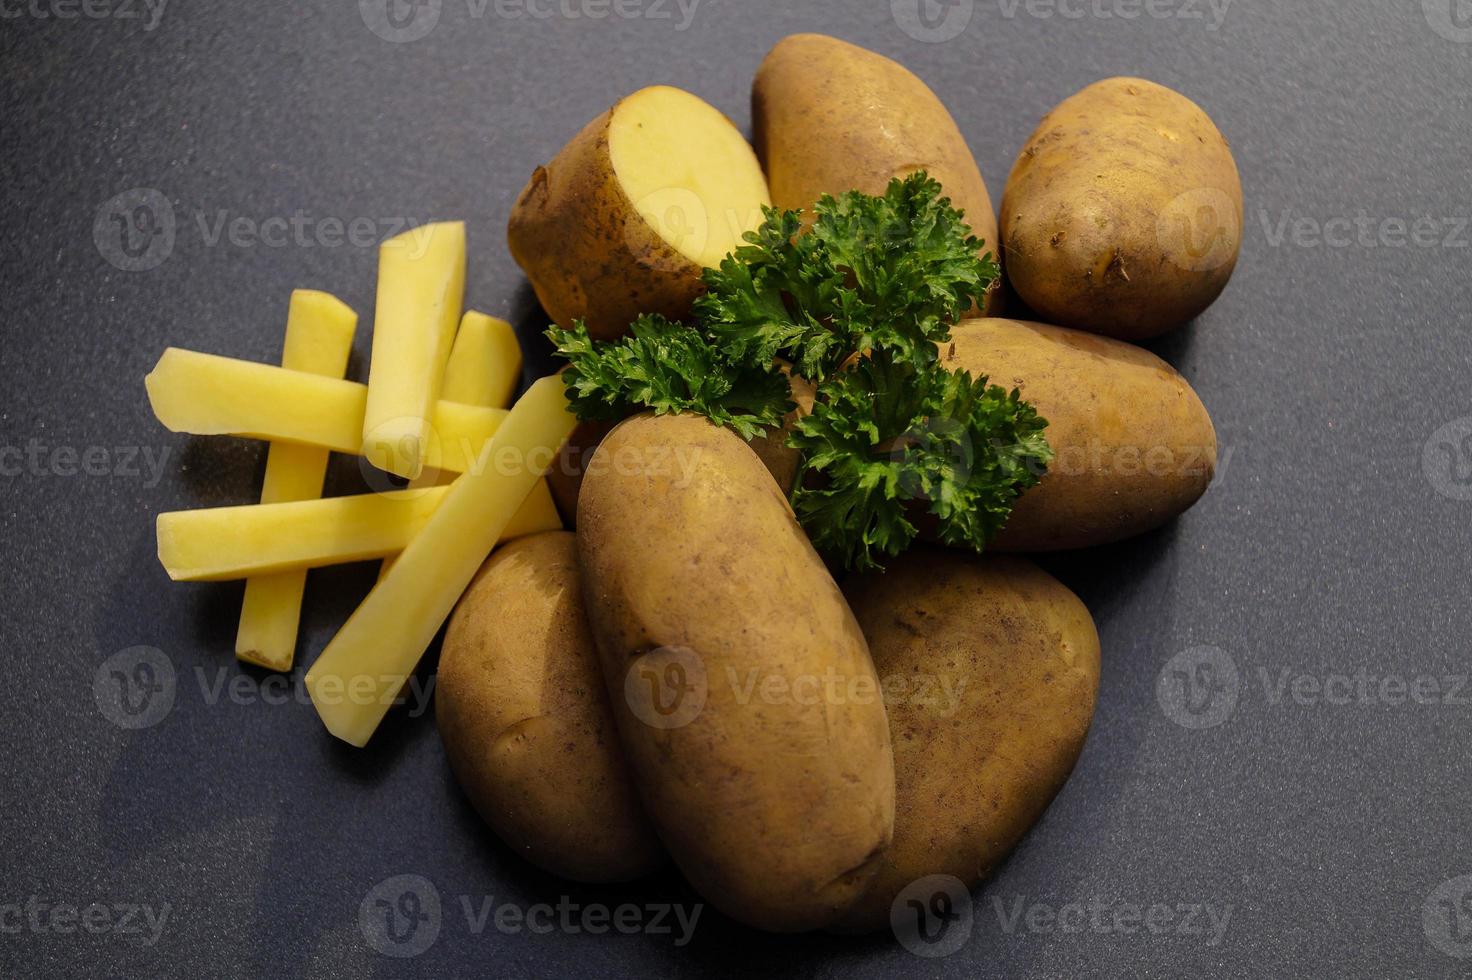 German potatoes directly after harvesting photo